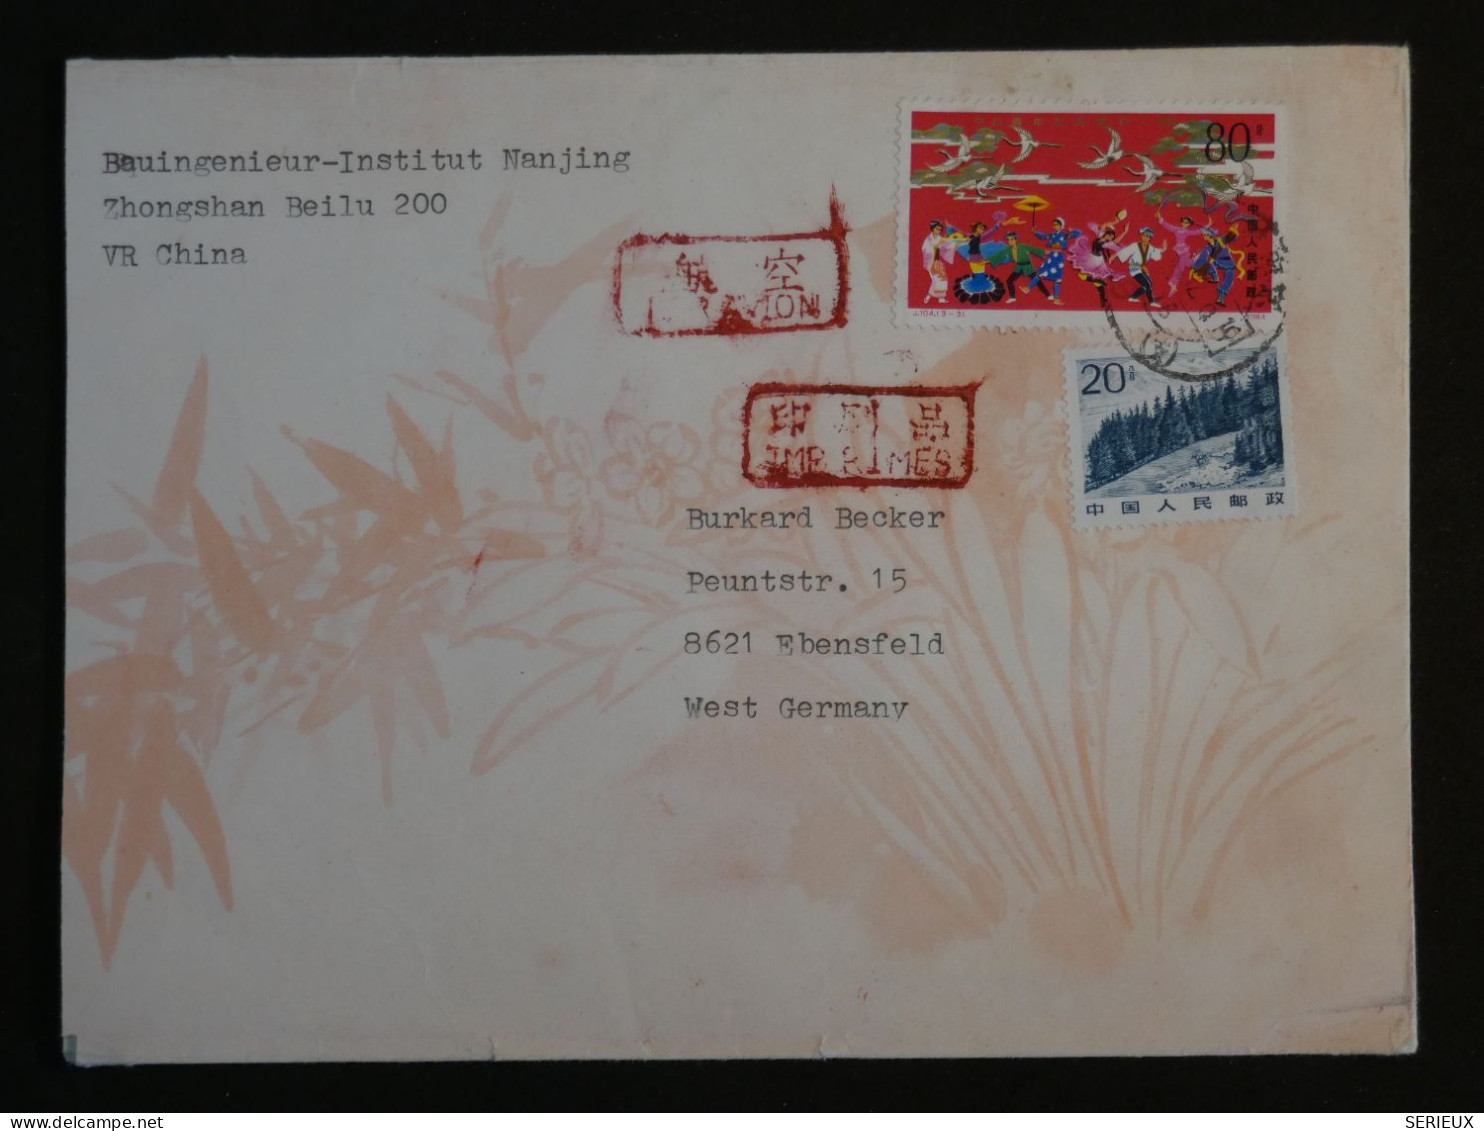 BQ16 CHINA  BELLE LETTRE  1970  A EBENSFELD GERMANY   ++AFF. INTERESSANT+ - Covers & Documents